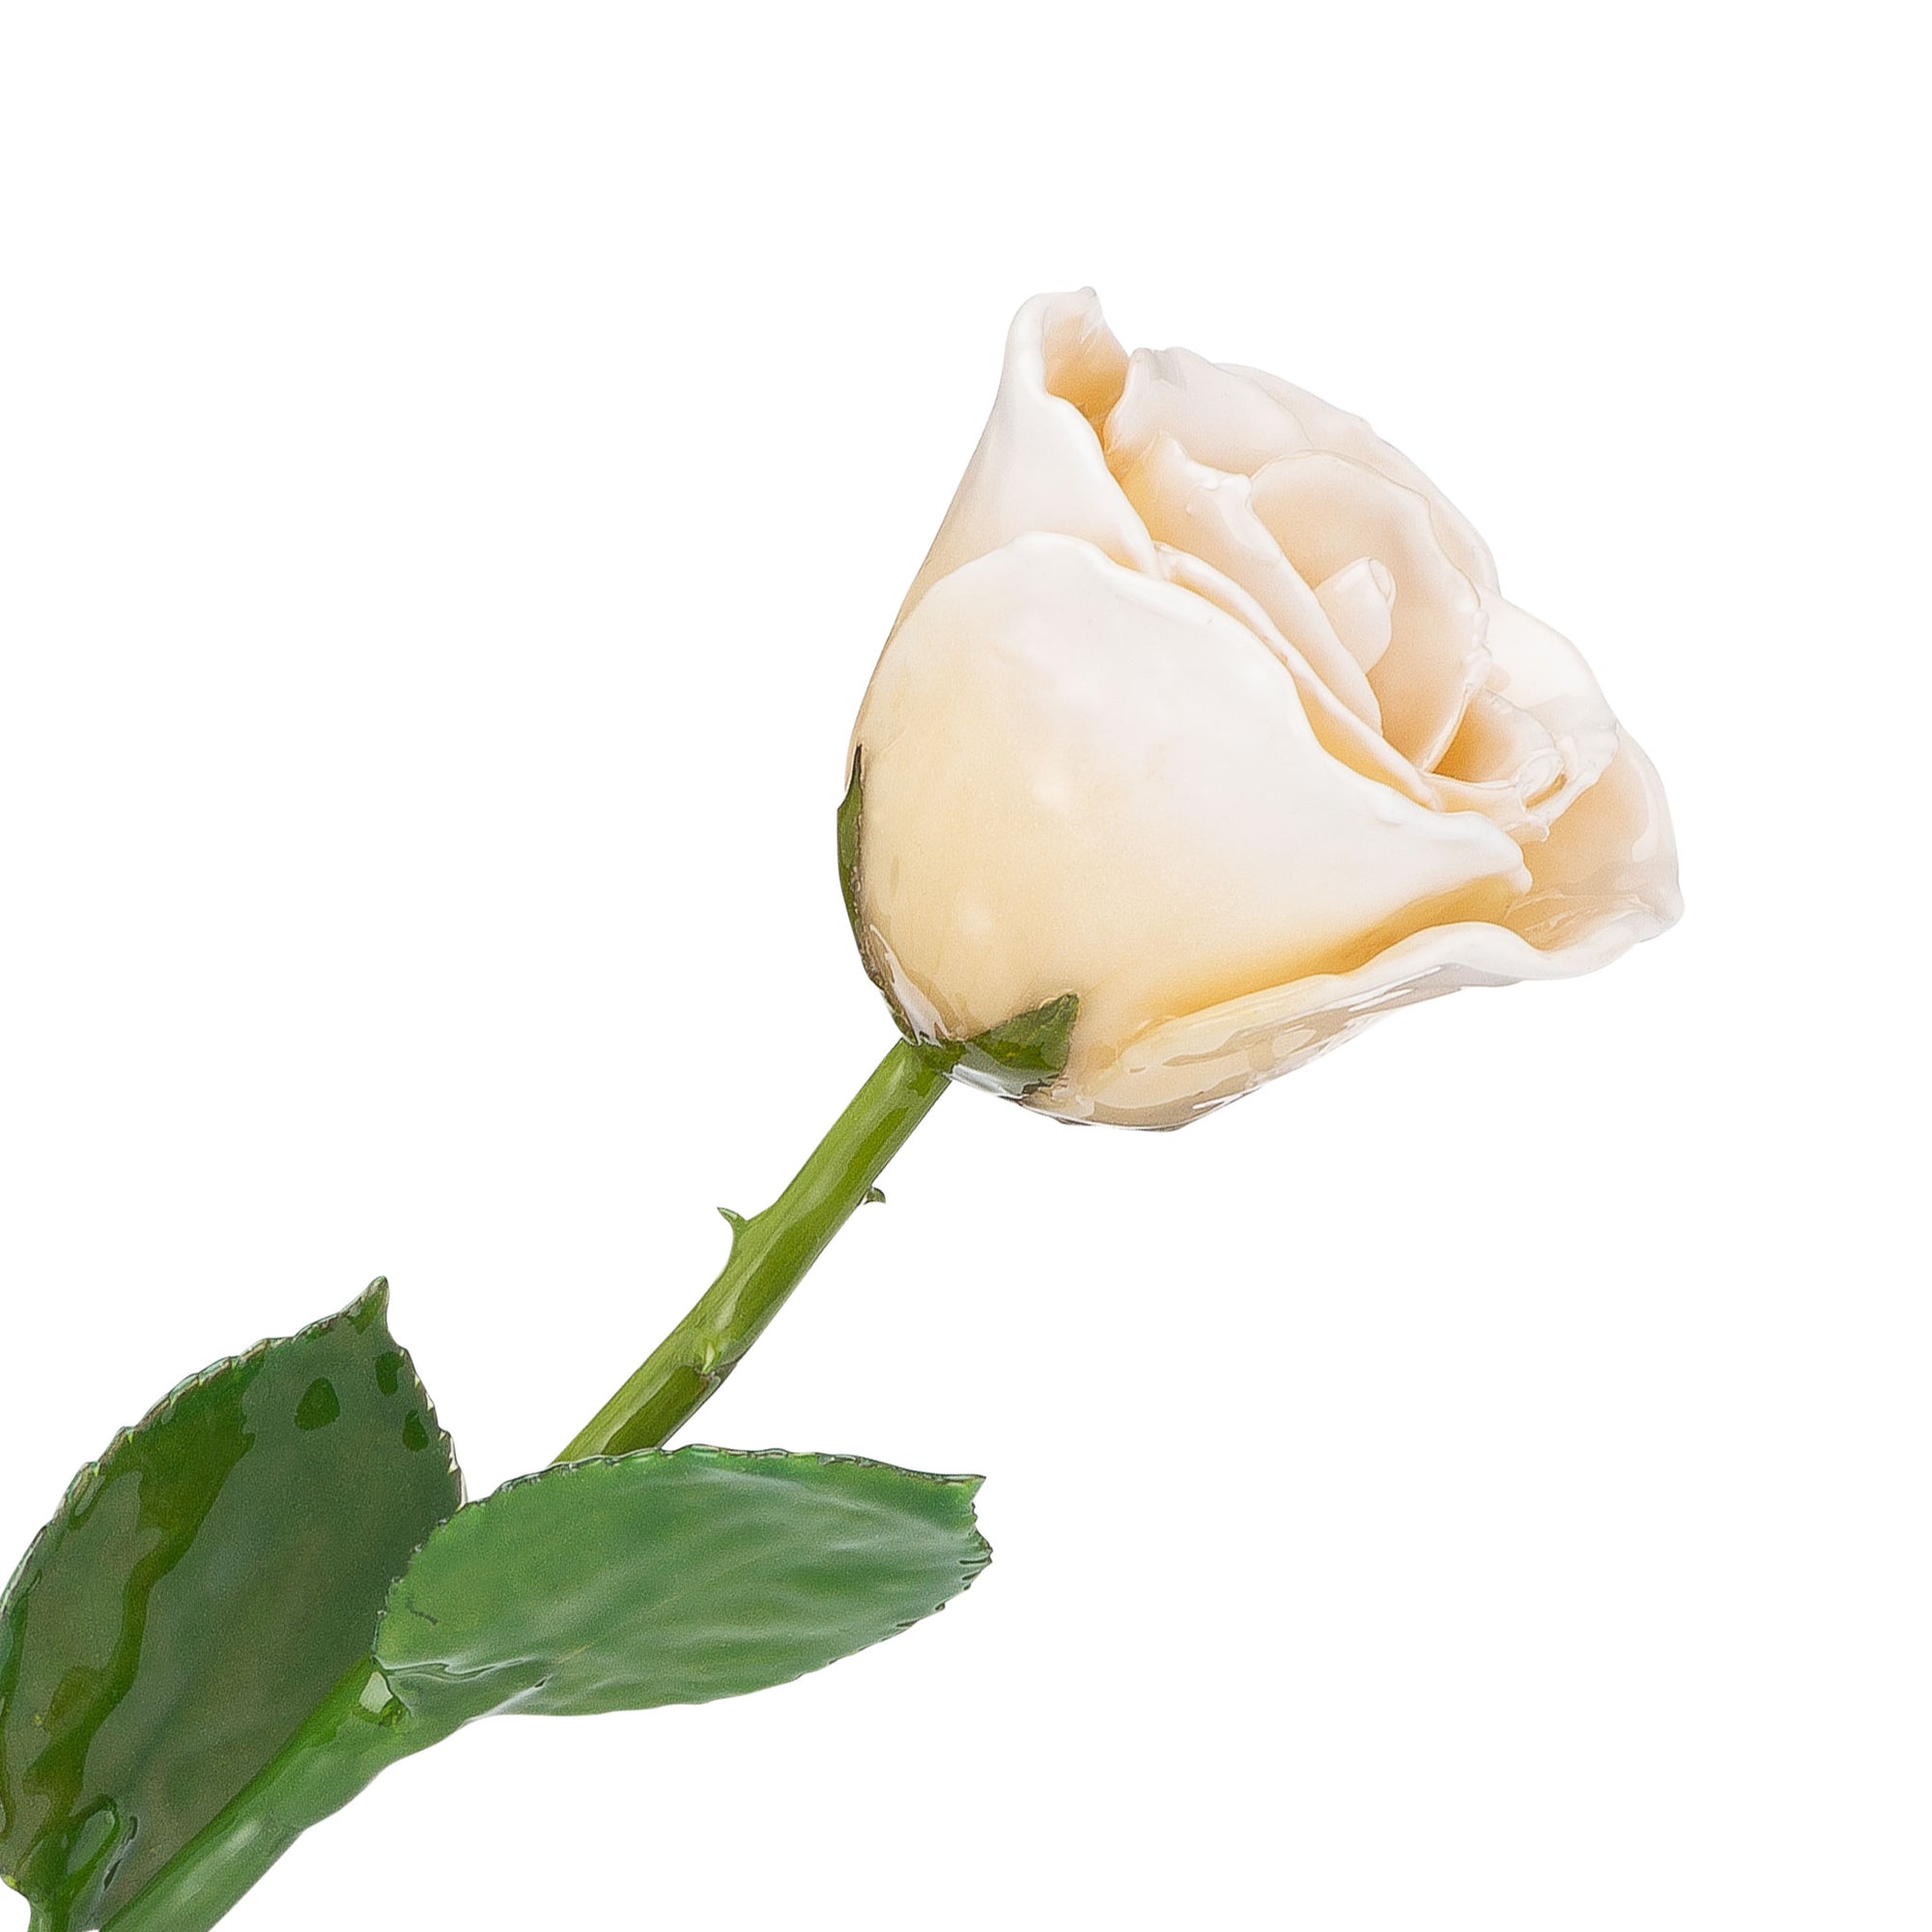 Natural (Green Stem) Forever Rose with White Colored Petals. View of Stem, Leaves, and Rose Petals. This a Forever Rose without any gold or other precious metals on it.